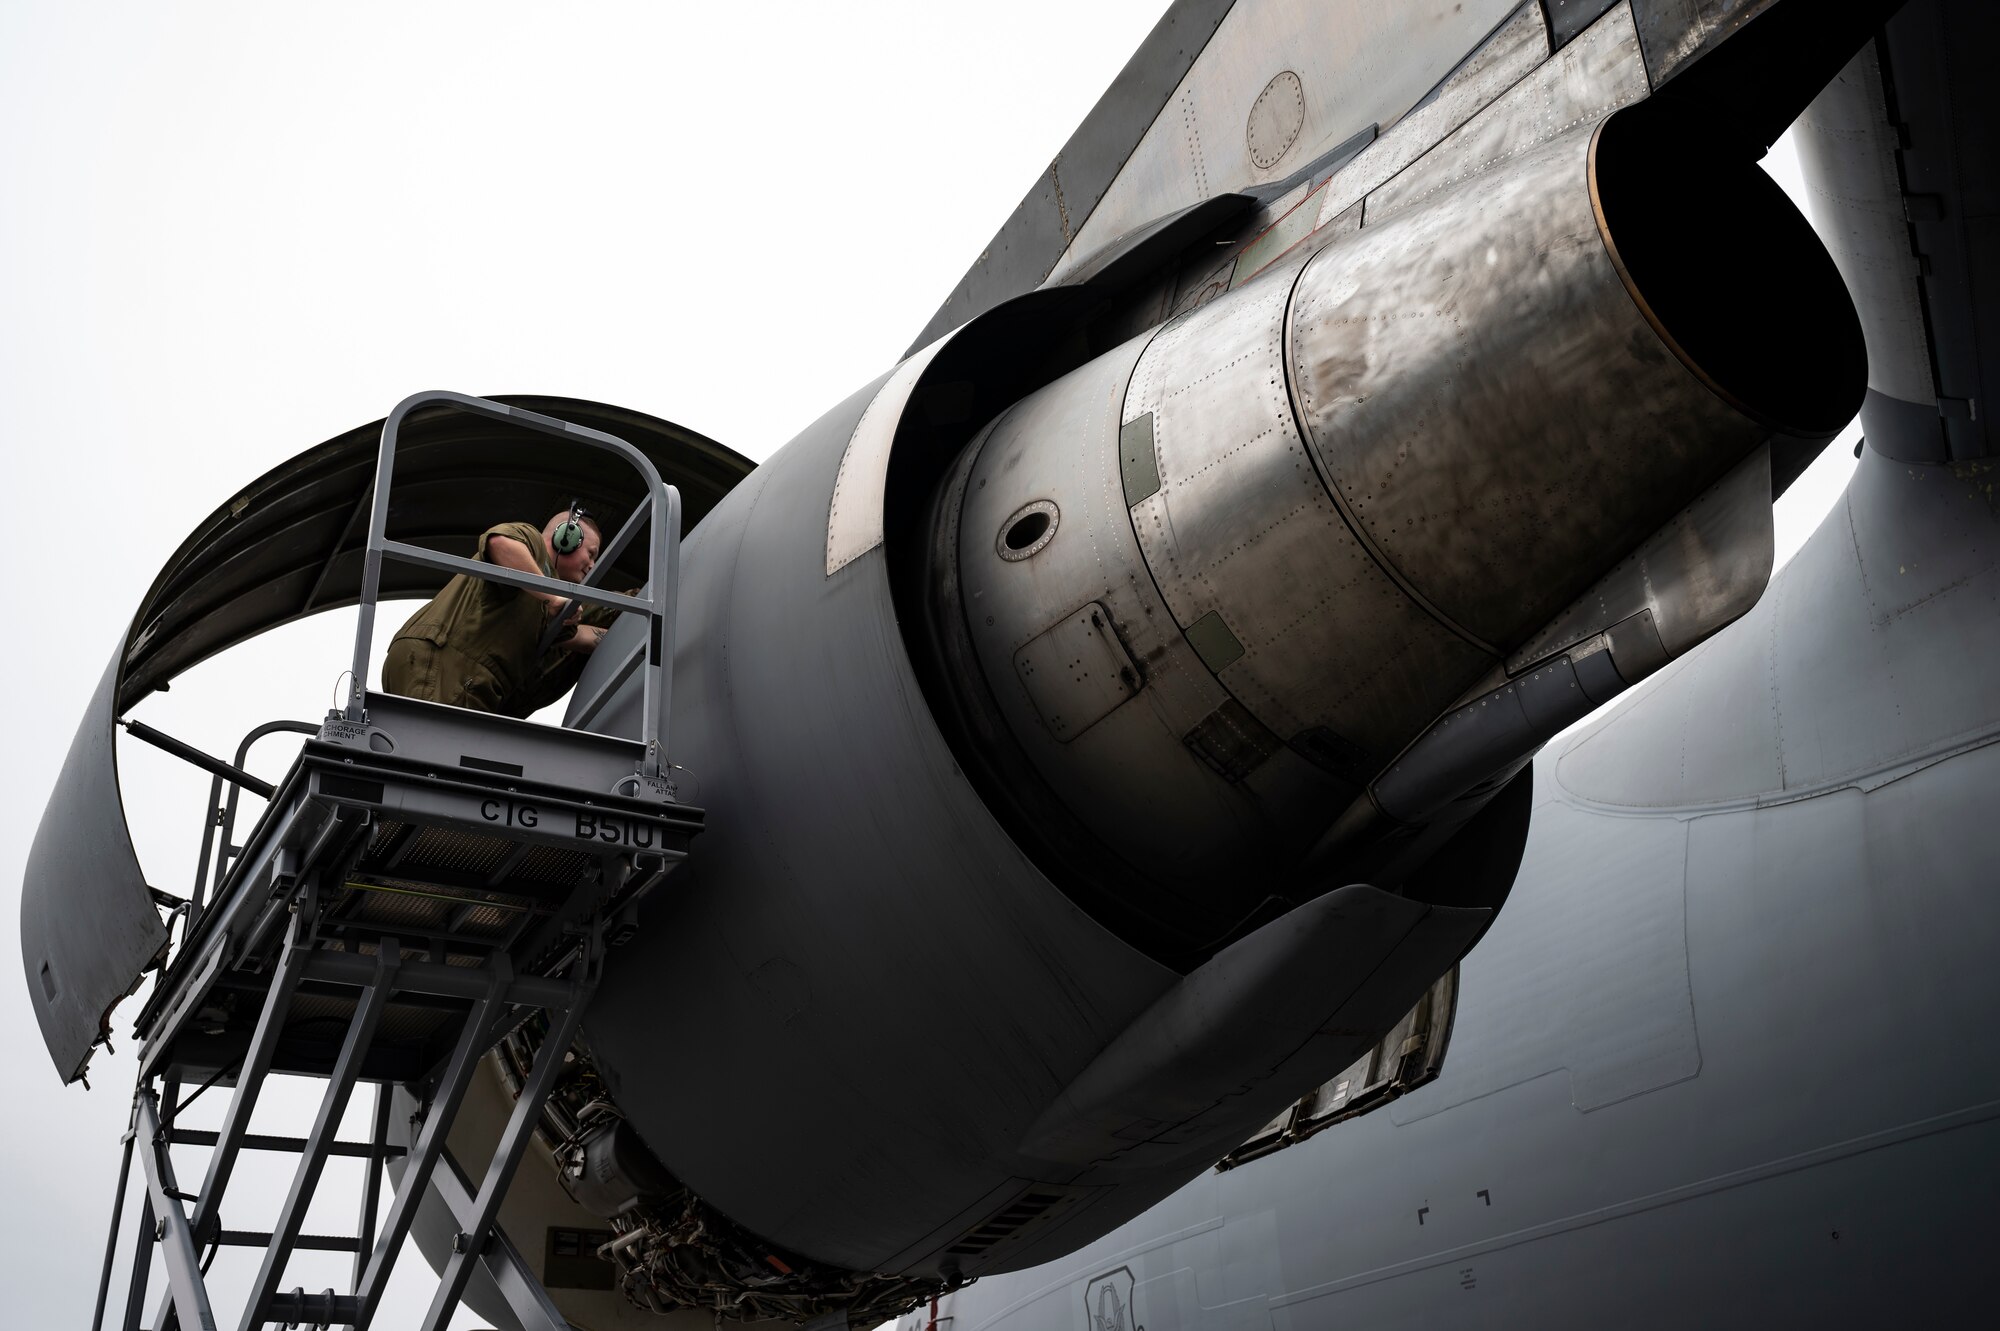 Airmen assigned to the 911th Maintenance Squadron conduct routine maintenance on a C-17 Globemaster III engine at the Pittsburgh International Airport Air Reserve Station, Pennsylvania, Feb. 22, 2022.